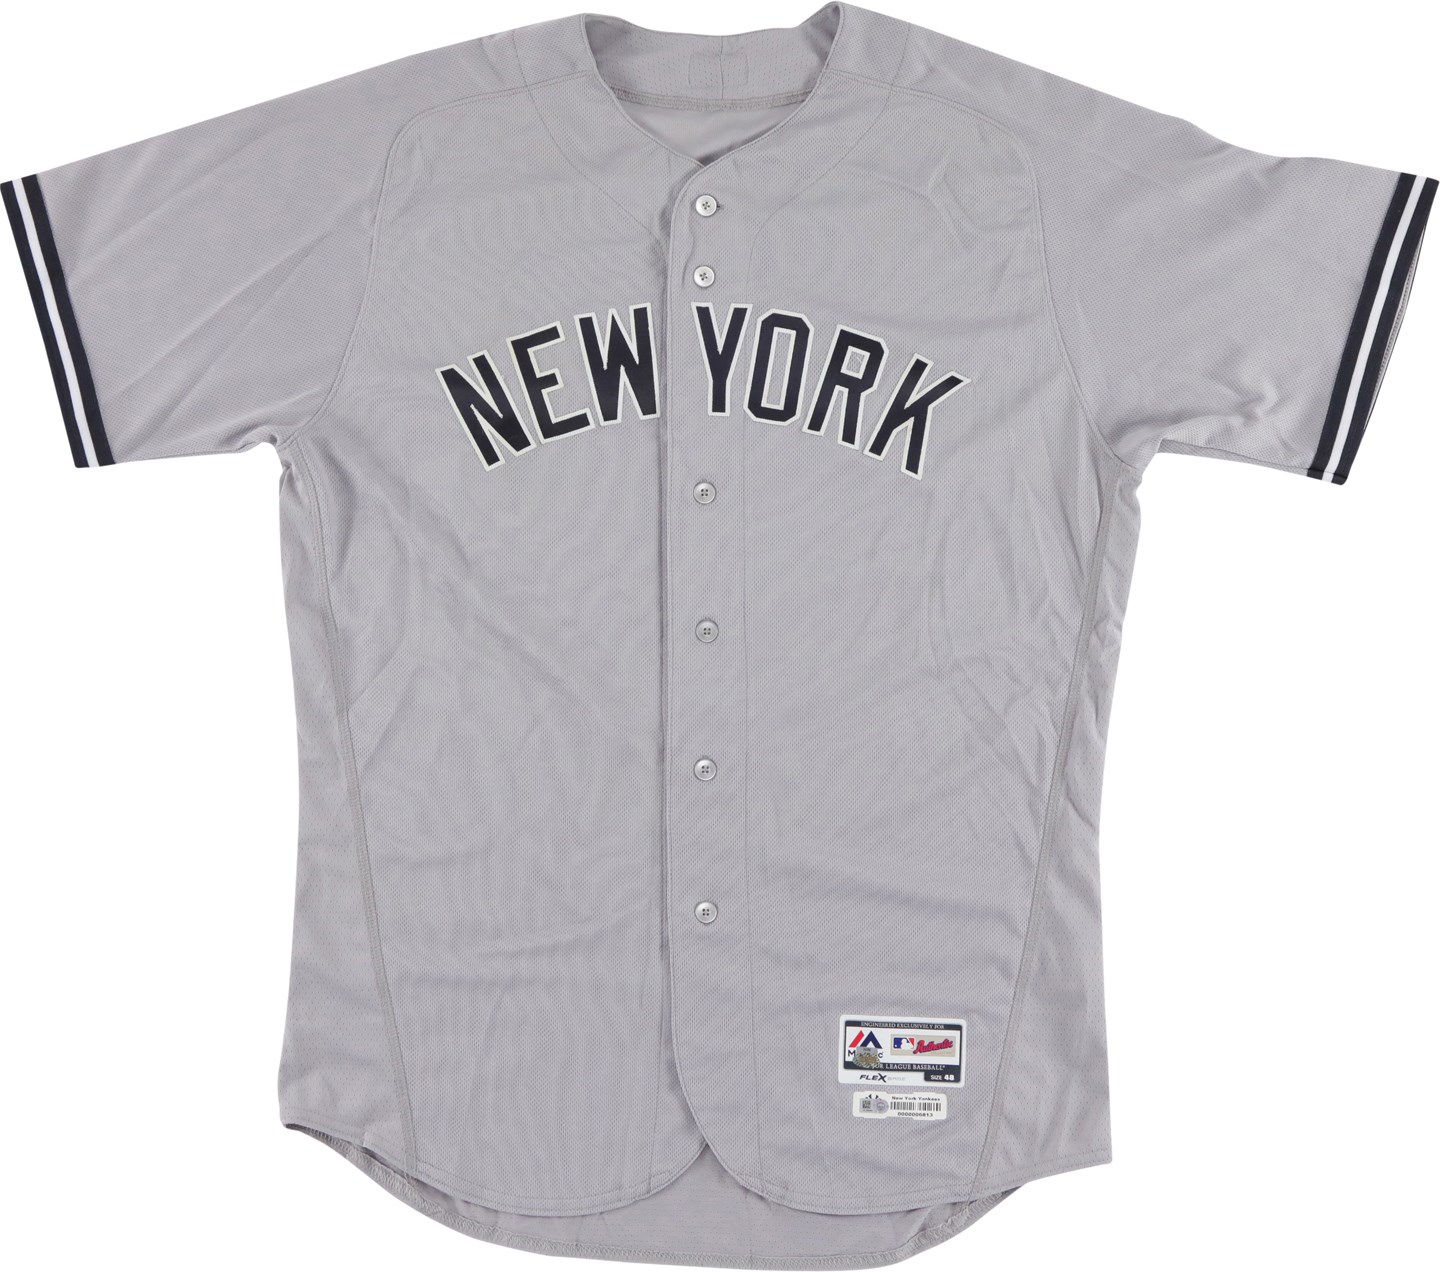 - 8/11/16 Alex Rodriguez New York Yankees Game Worn Photo-Matched Jersey - Final Career Game at Fenway (MLB & Steiner)